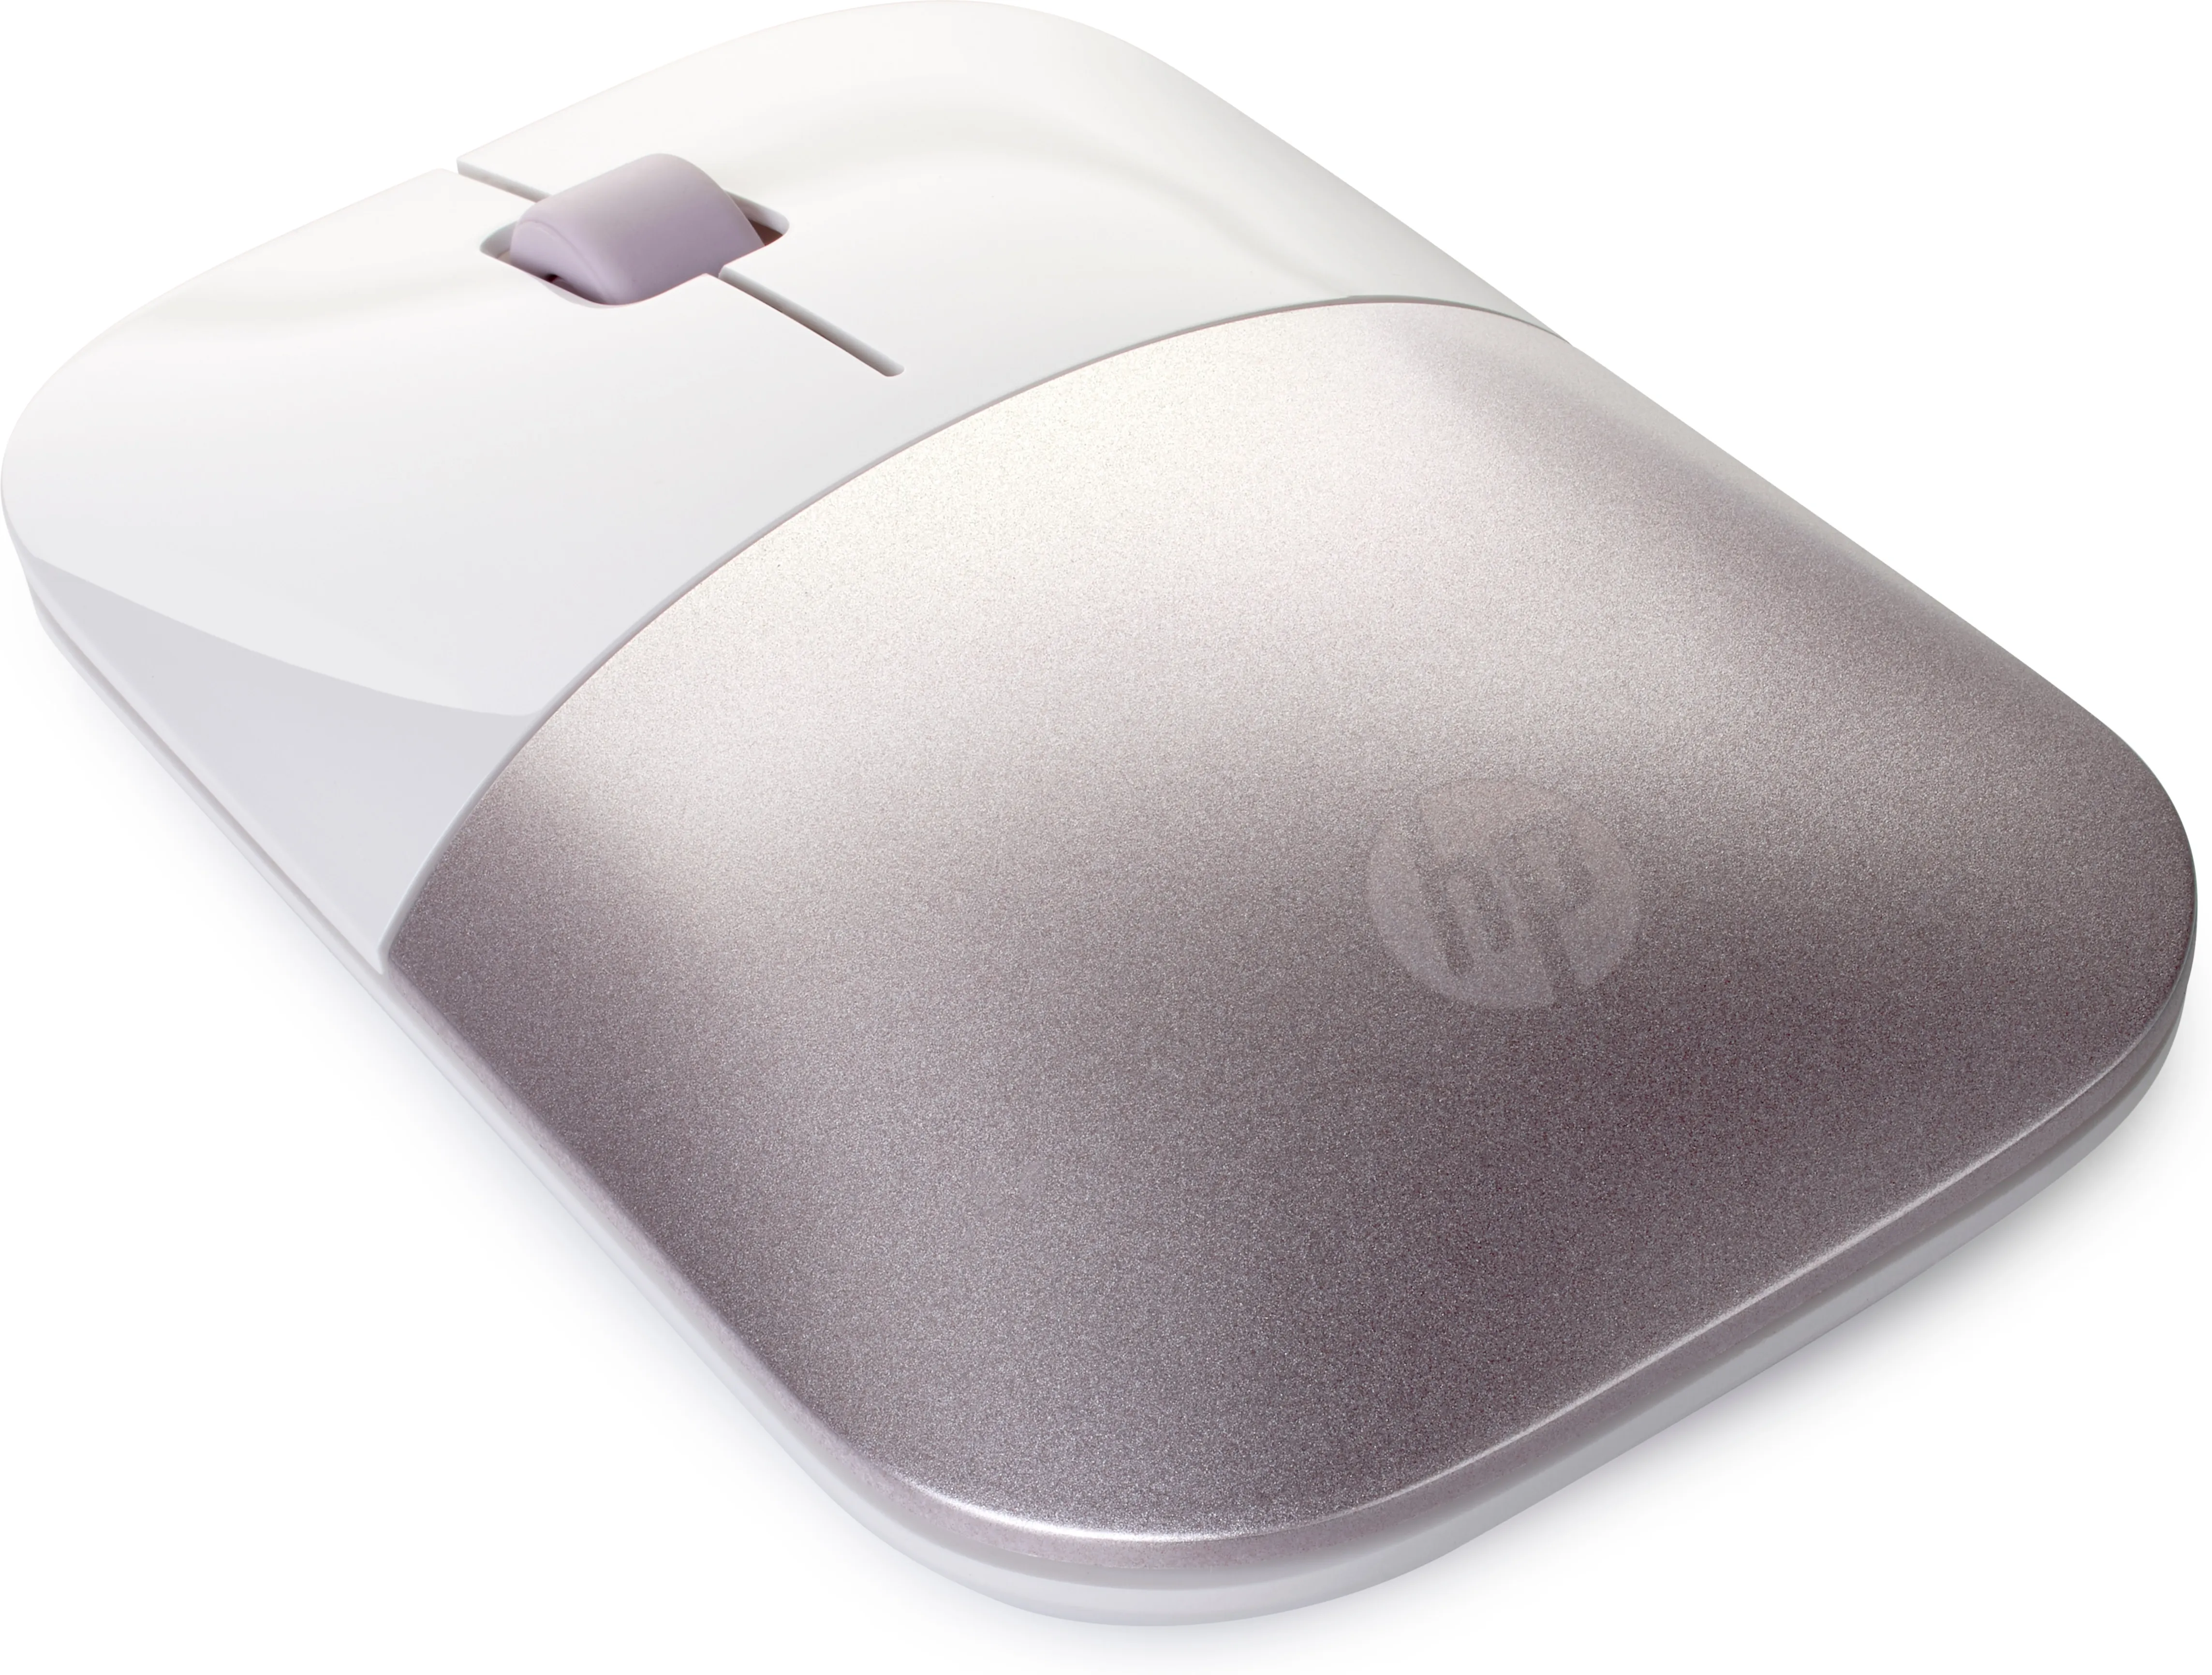 Achat HP Z3700 Wireless Mouse - Tranquil Pink/White sur hello RSE - visuel 5